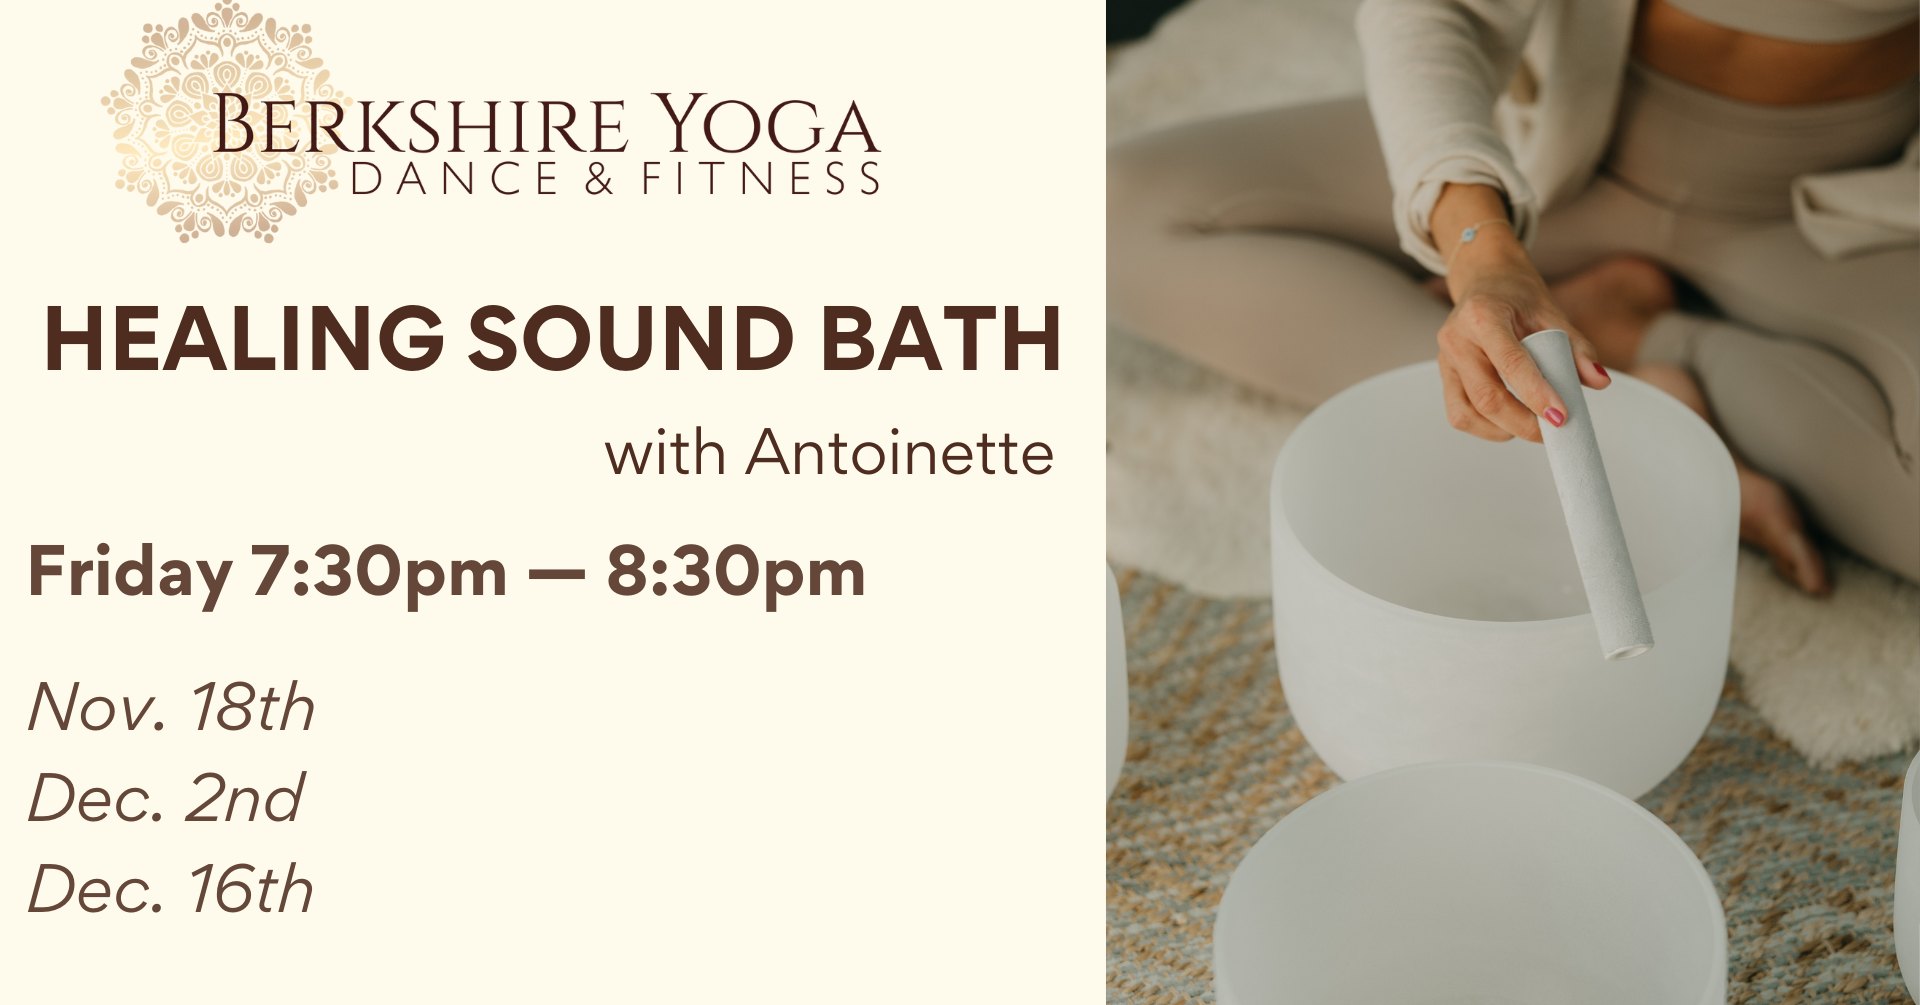 Healing Sound Bath at Berkshire Yoga Dance and Fitness